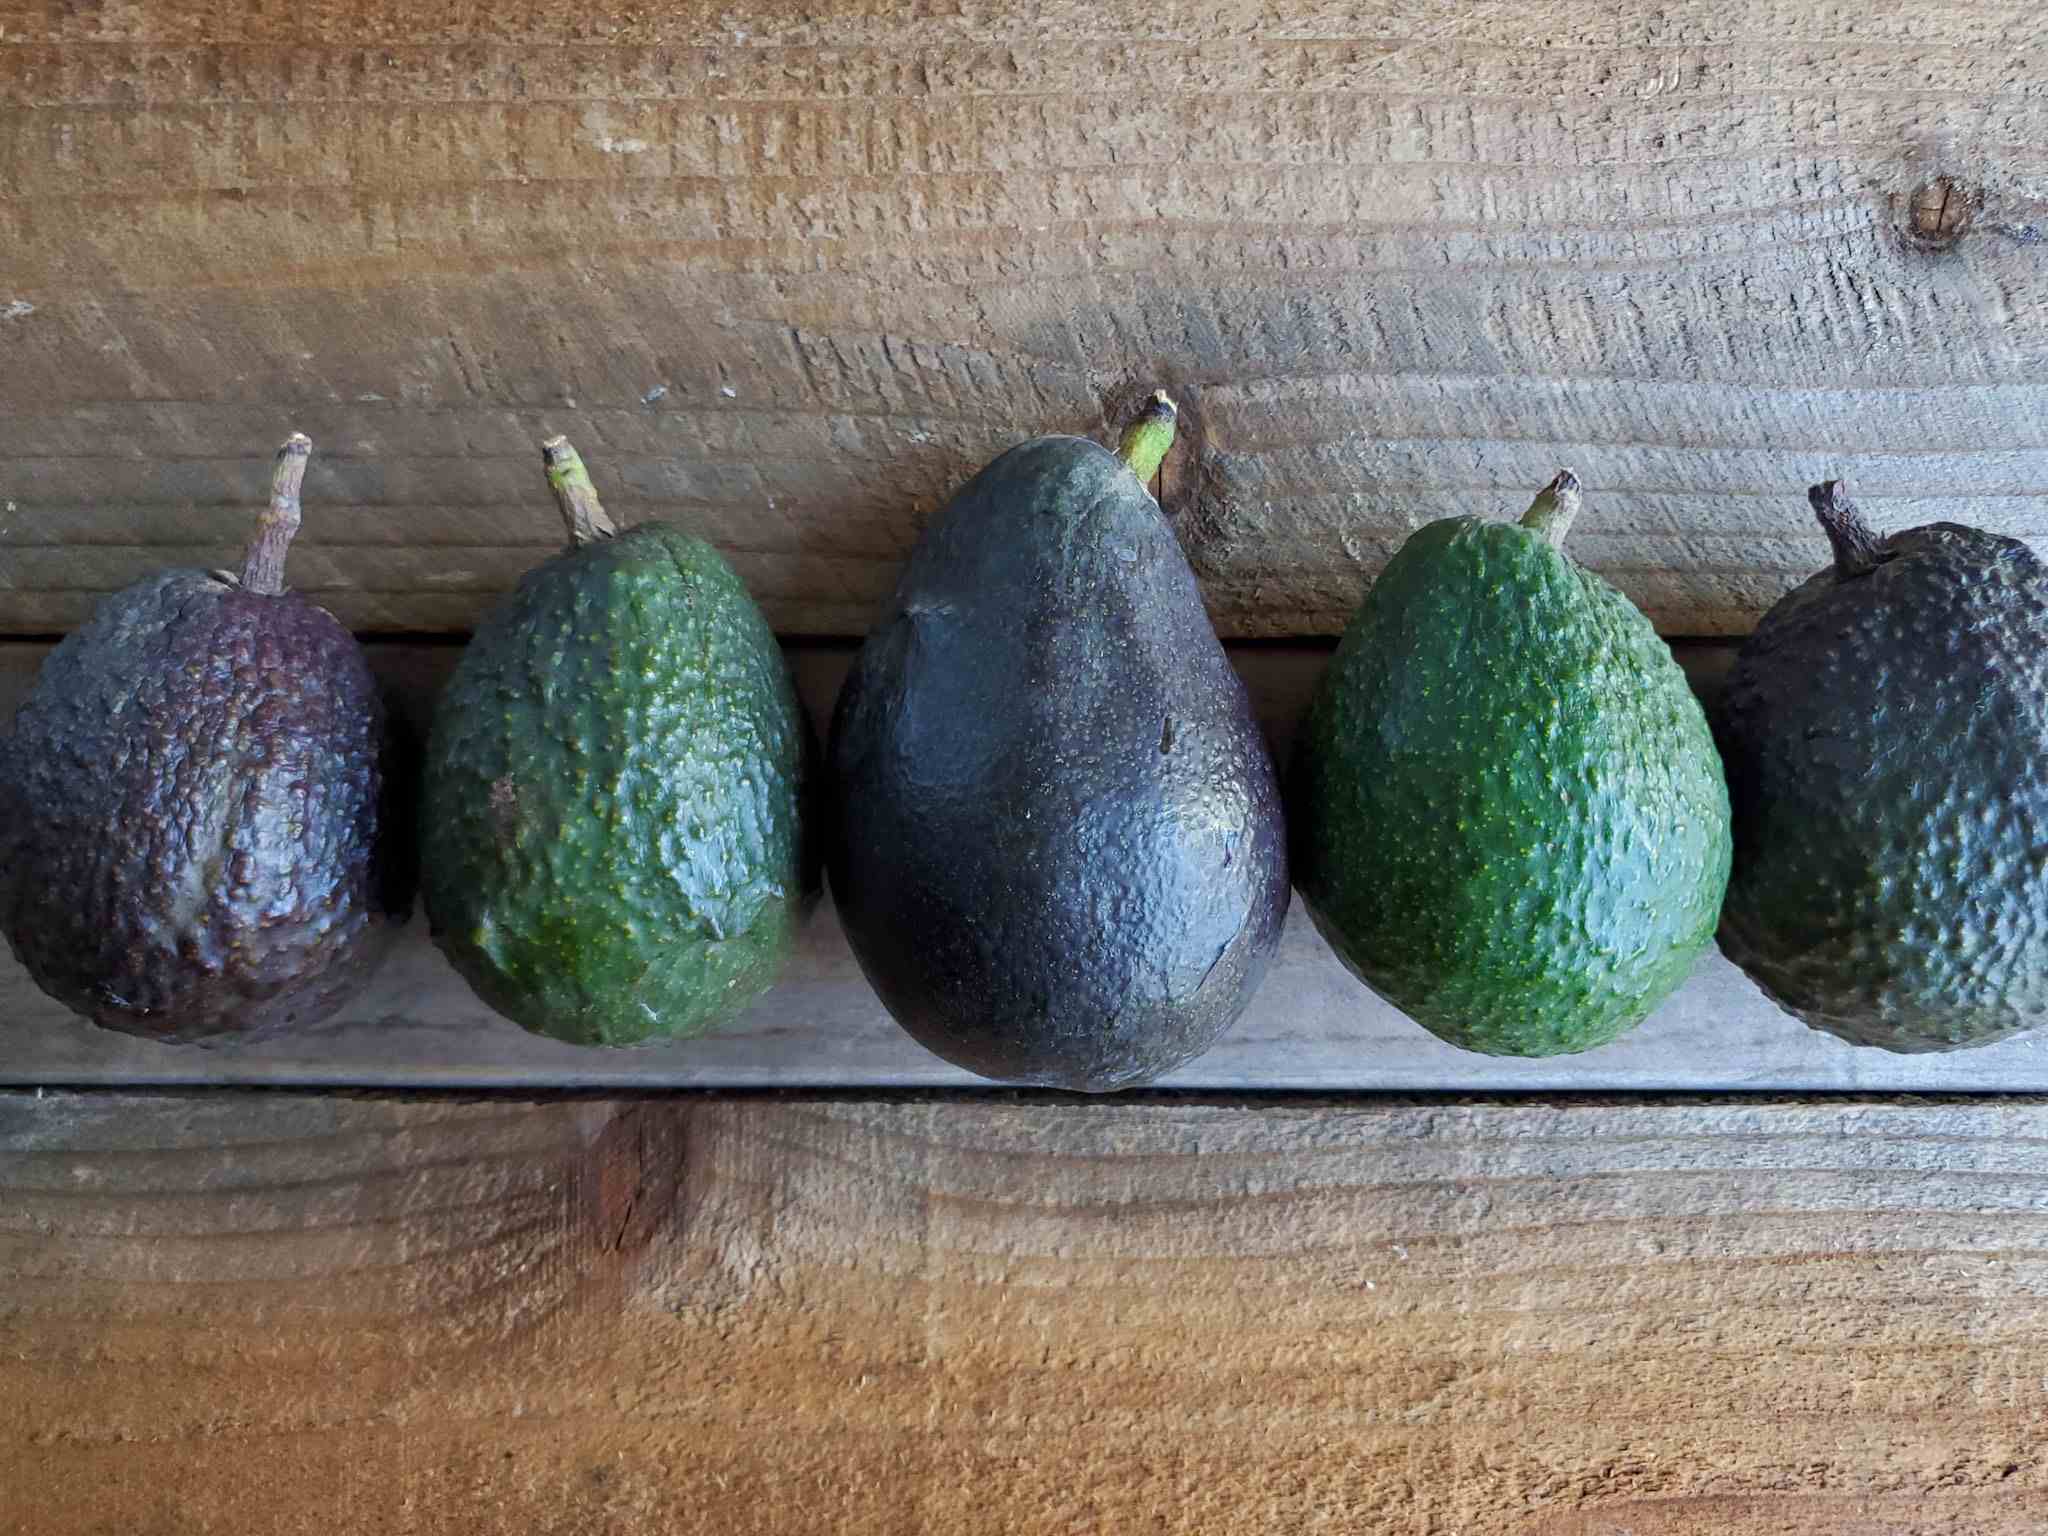 Five avocados are lined up in a single file line amongst a wooden backdrop. Four of them are Hass avocados while the middle is a large Sir Prize avocado. Three of the avocados are close to being ripe and ready to eat. When you can grow avocados, it's fun to have a variety of types. 